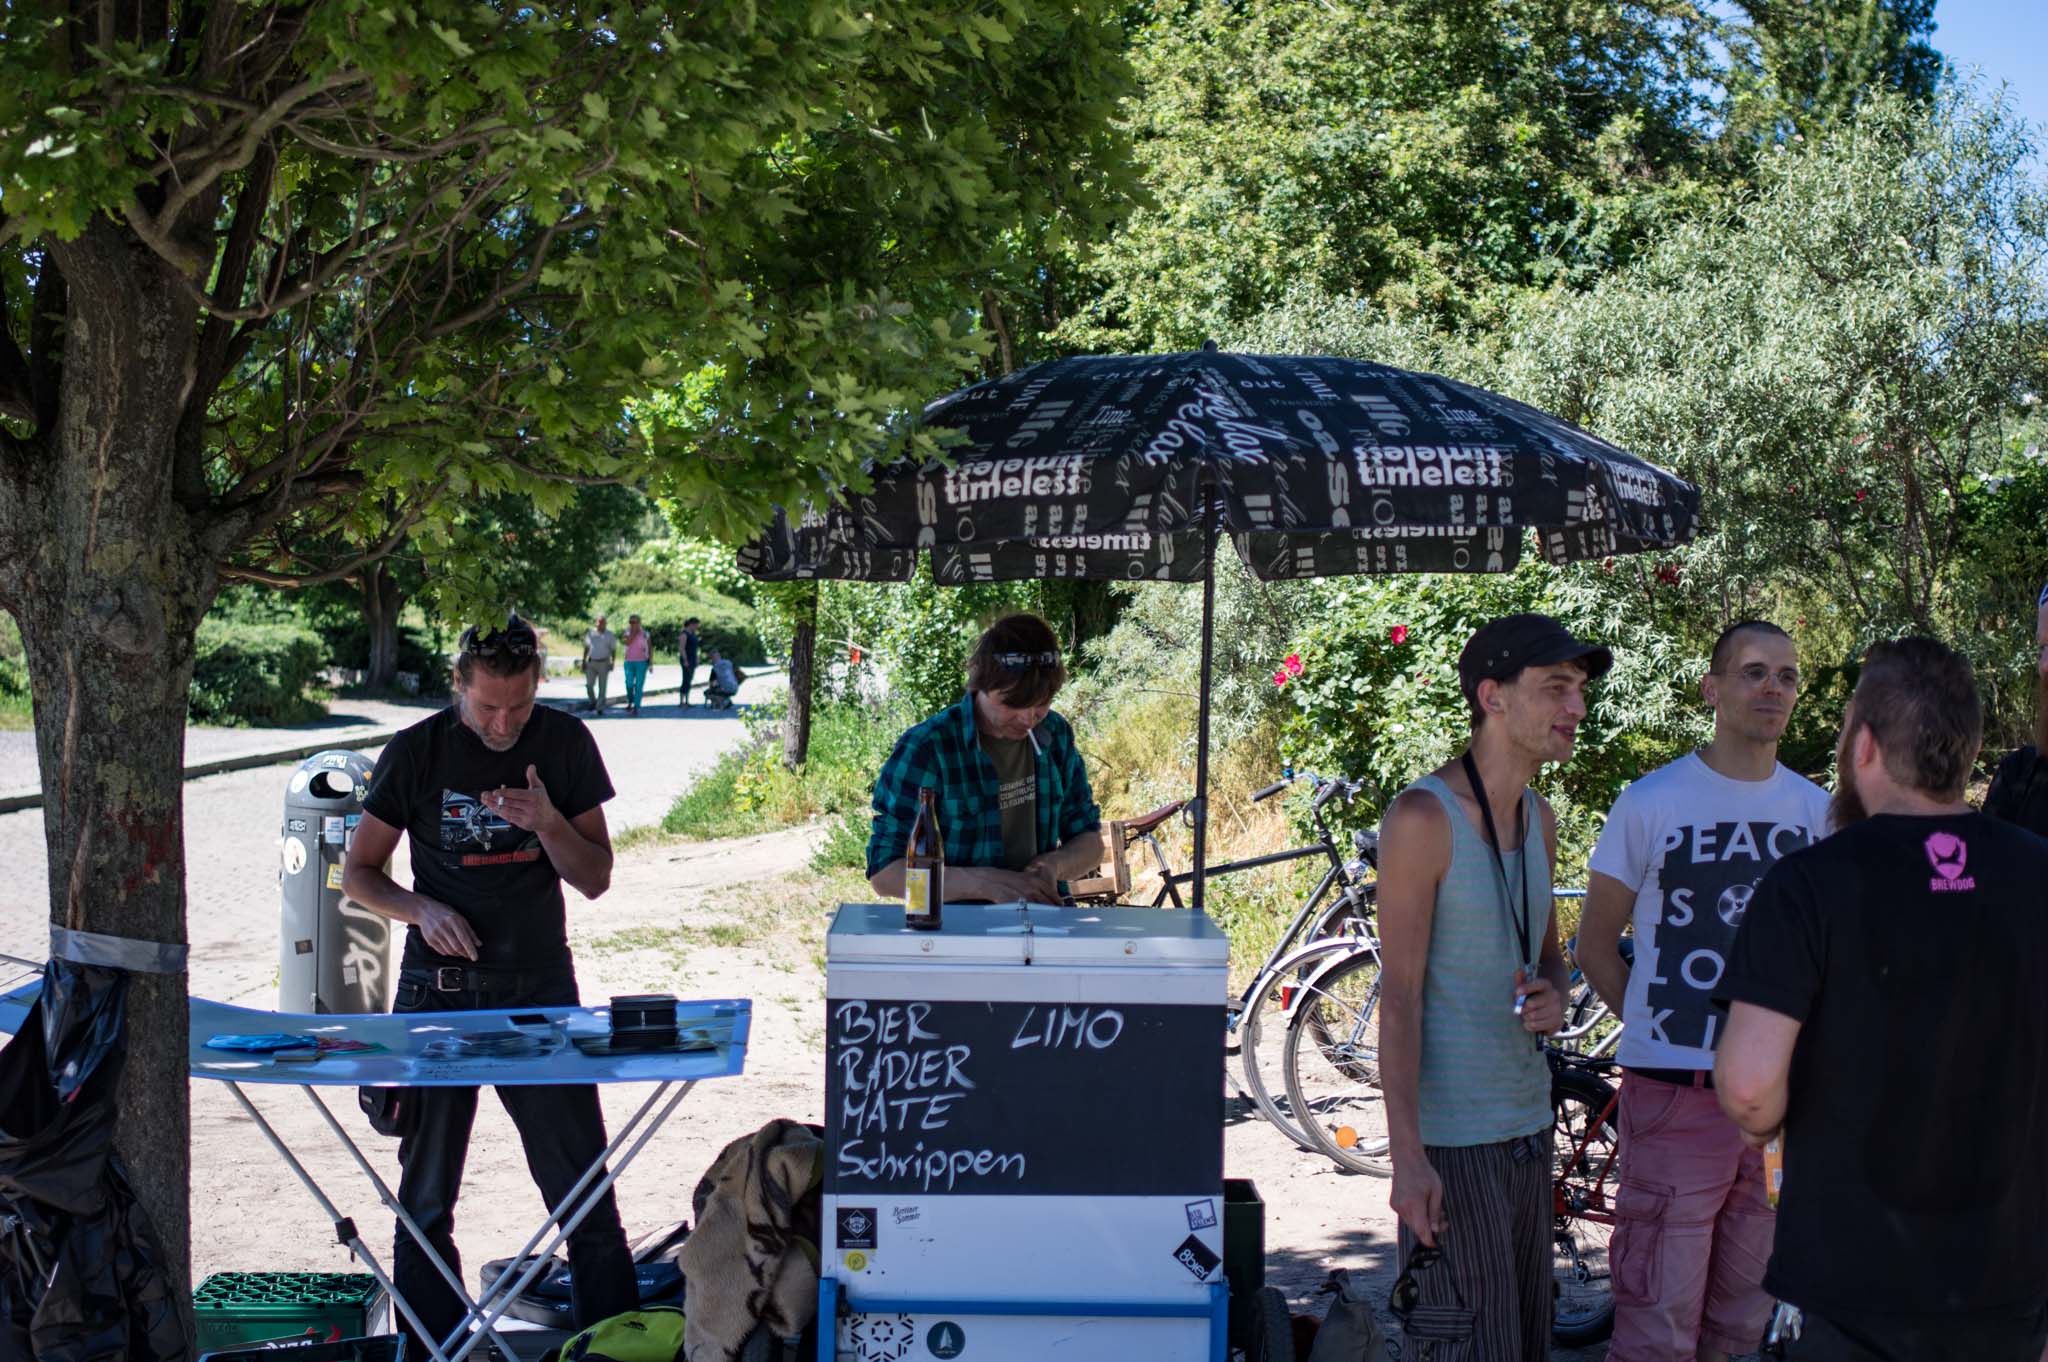 Guys selling beer and CDs at a concert in Berlin's Mauerpark June 2017